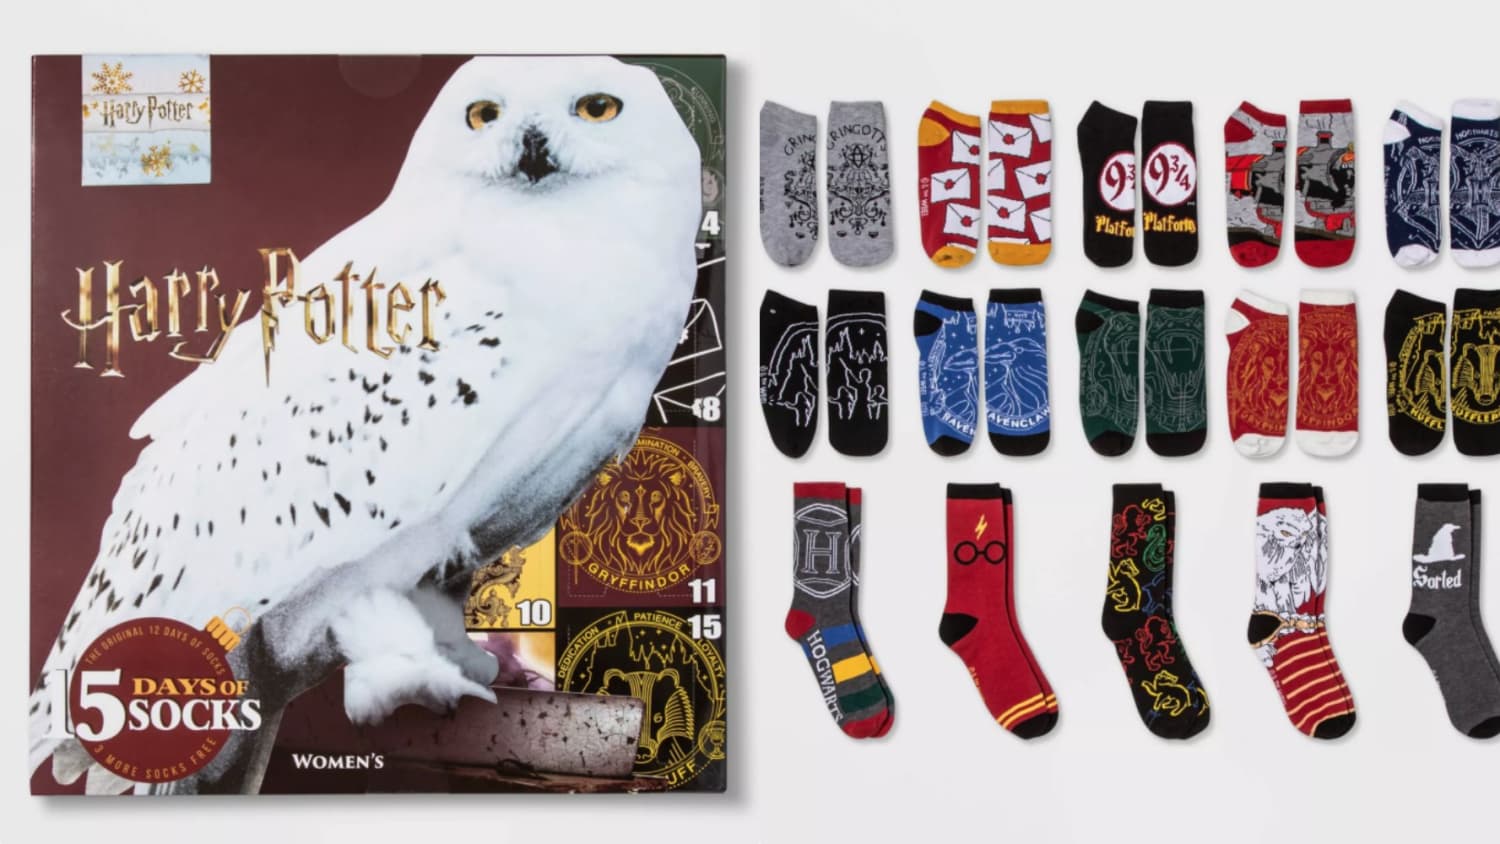 In stock NEW Wizarding World Harry Potter 12 Days of Socks Advent